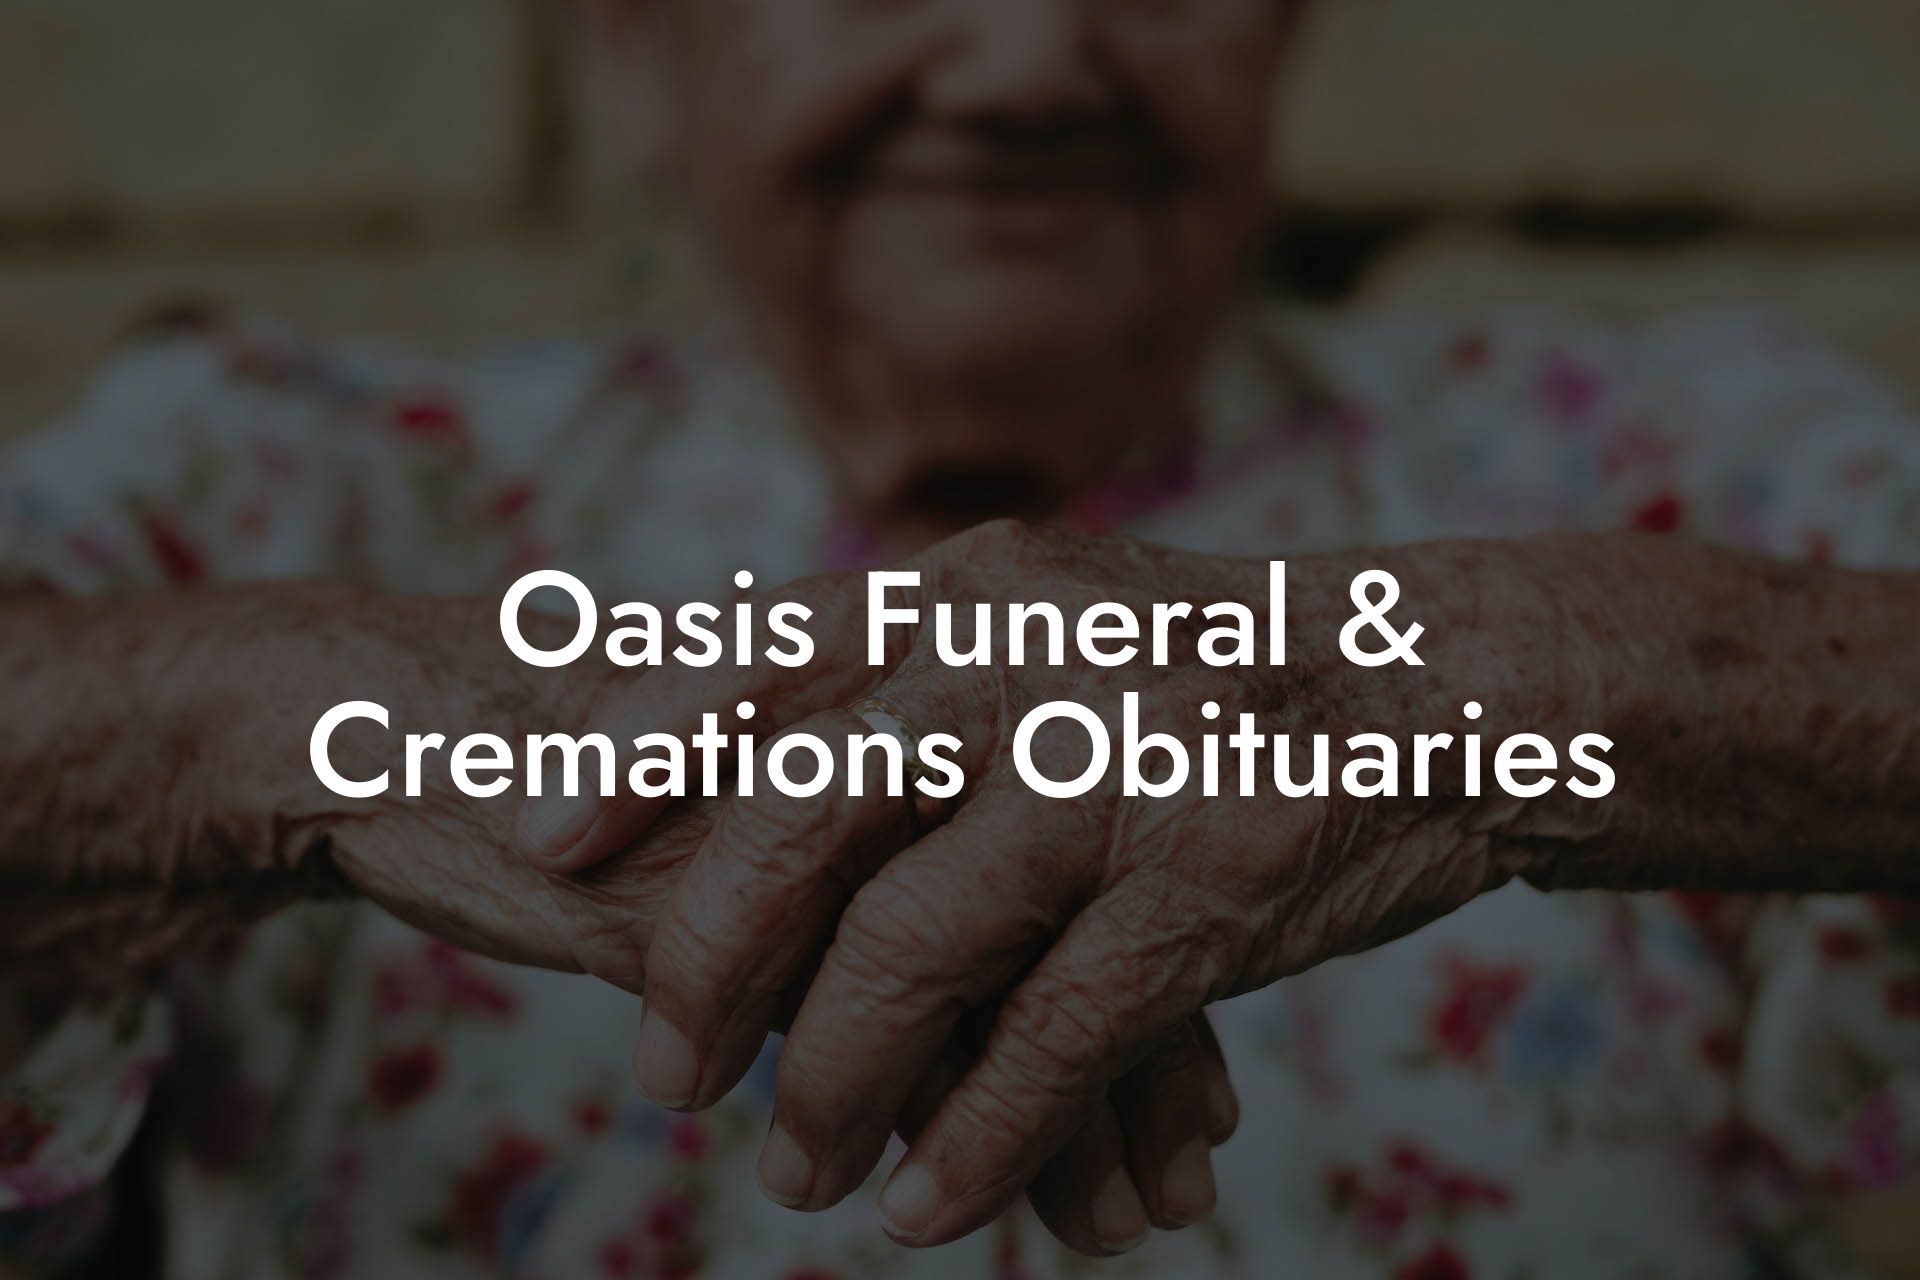 Oasis Funeral & Cremations Obituaries